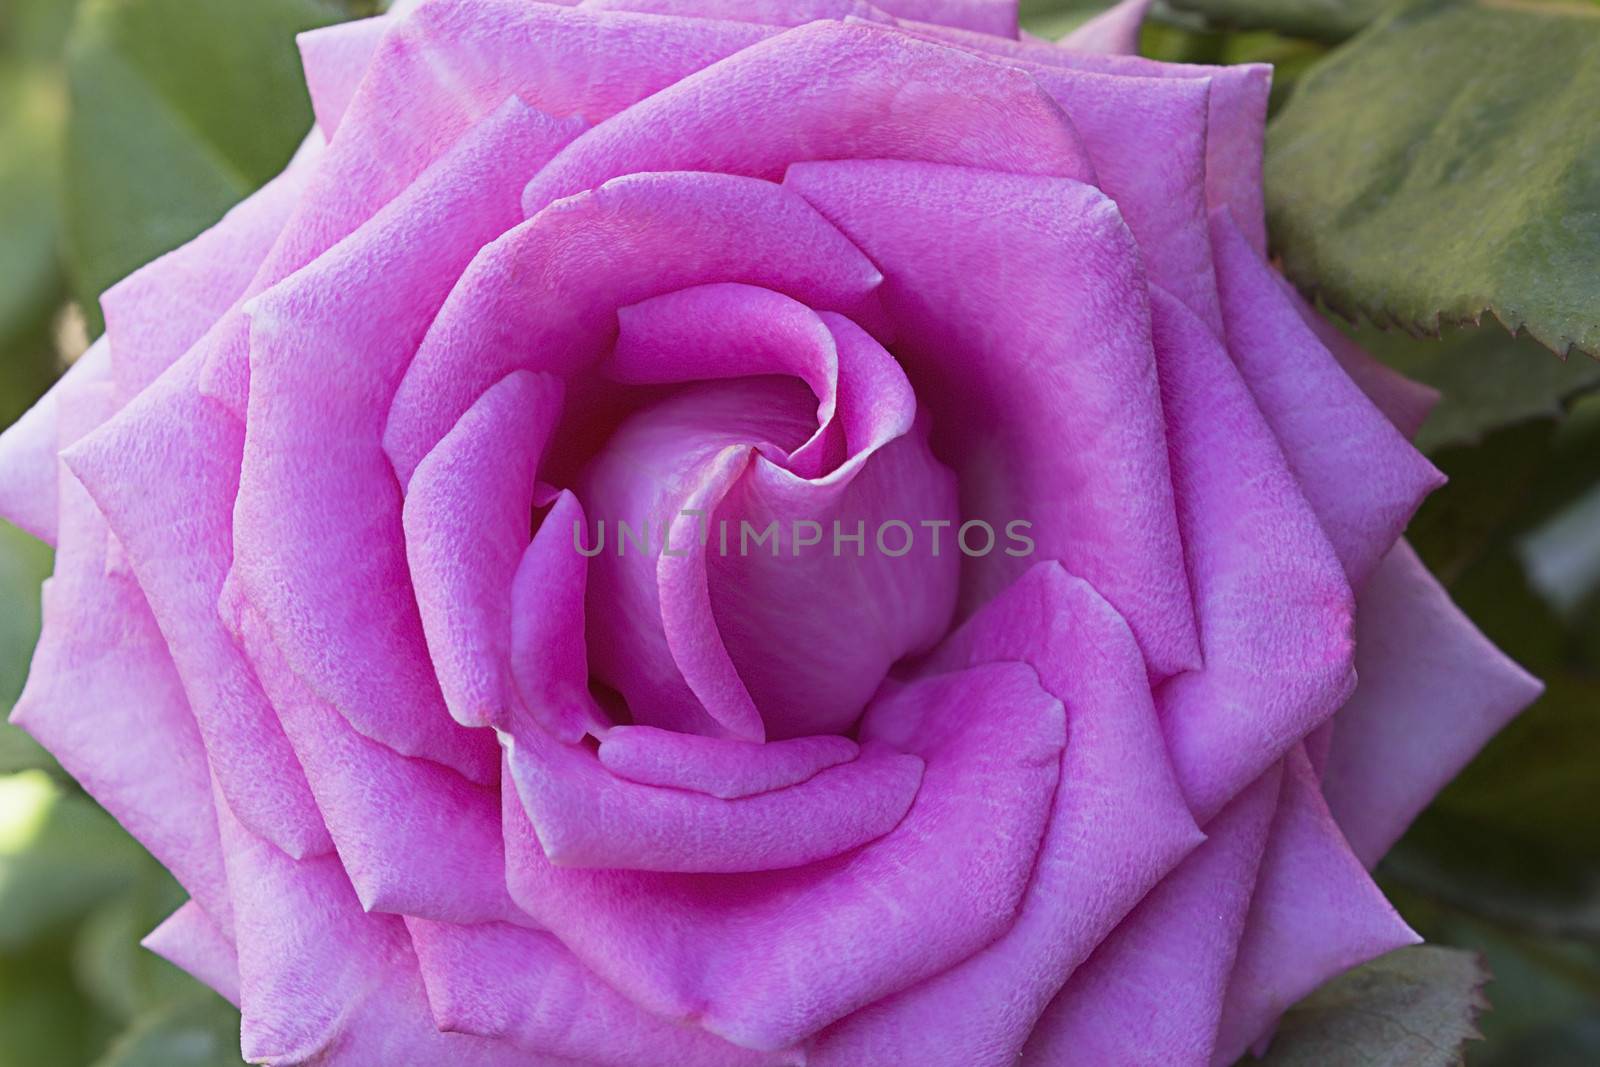 Hot pink flower tea-hybrid rose , blooming in the garden . Photographed close-up on the background of green leaves.
